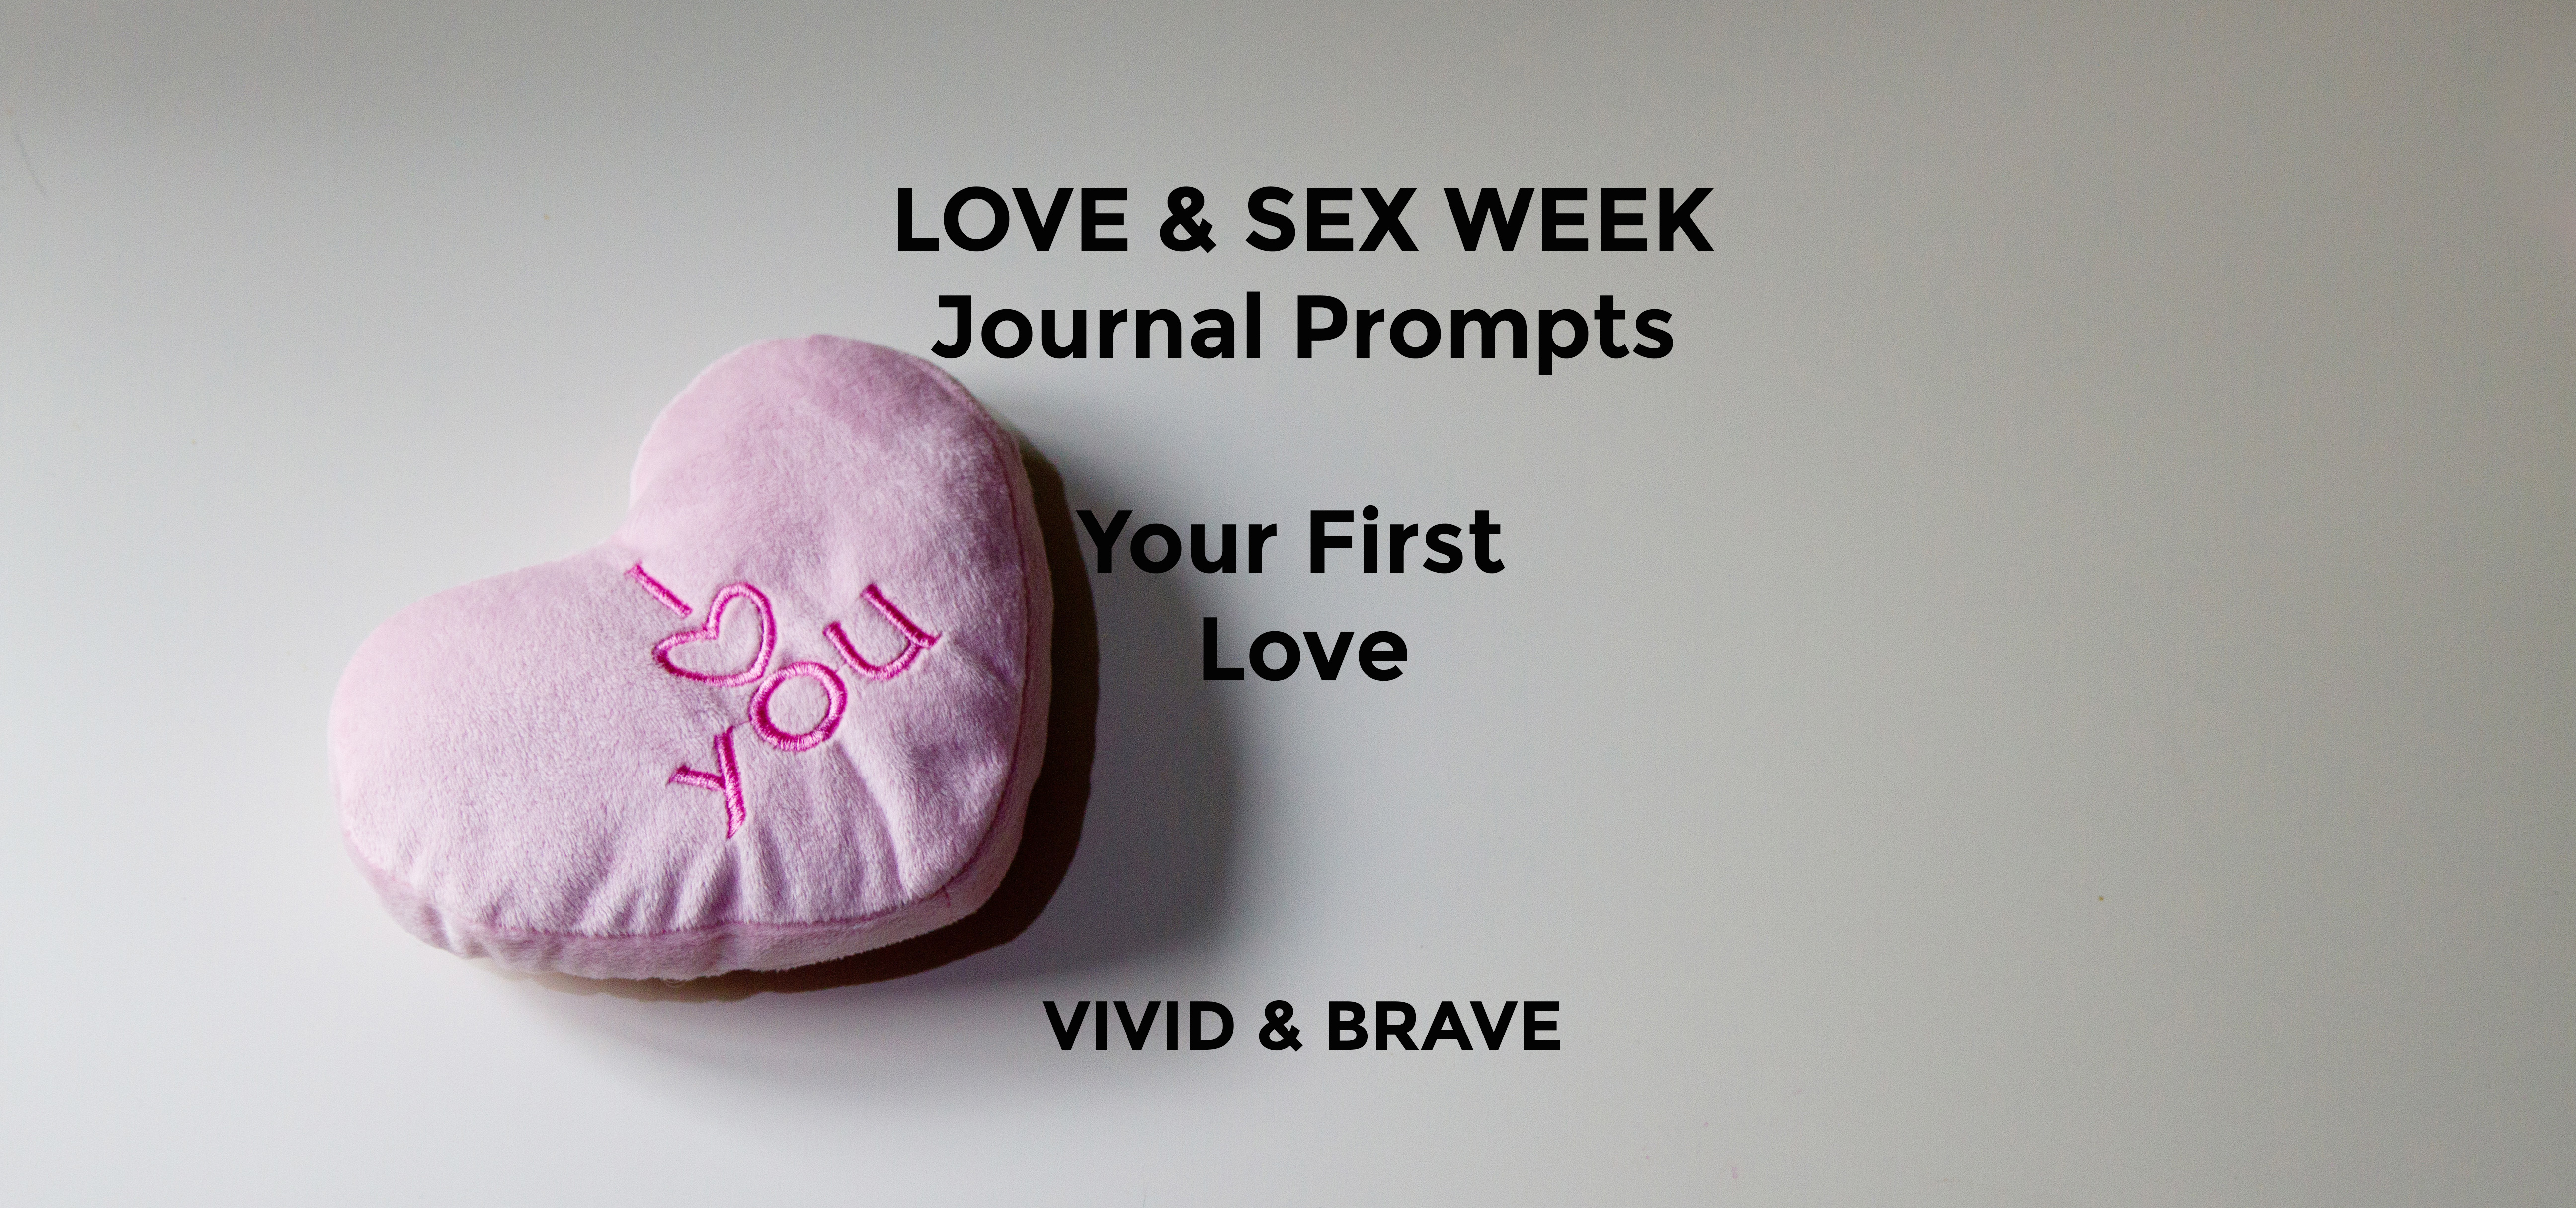 Love & Sex Week Journal Prompts - Your First Love (Prompt #1)